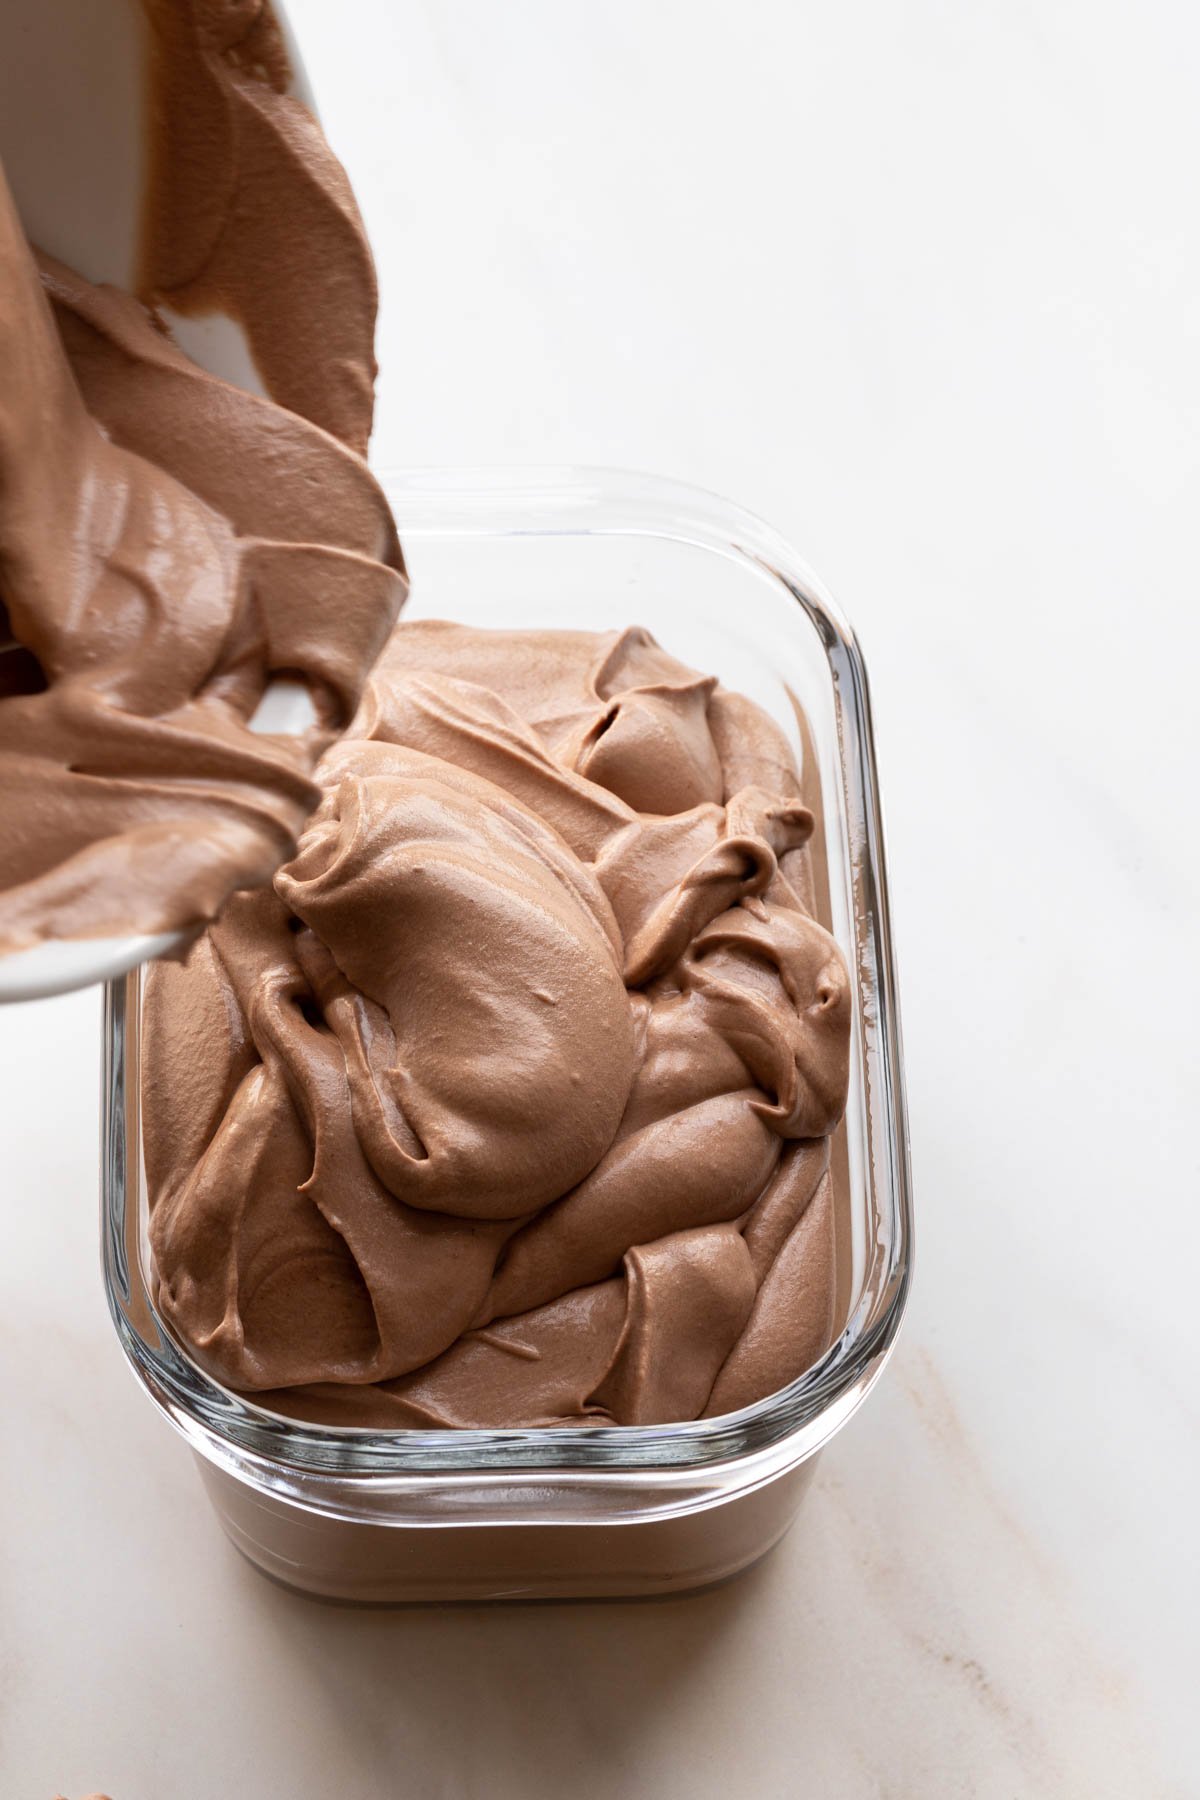 Pouring no churn chocolate ice cream into a glass container